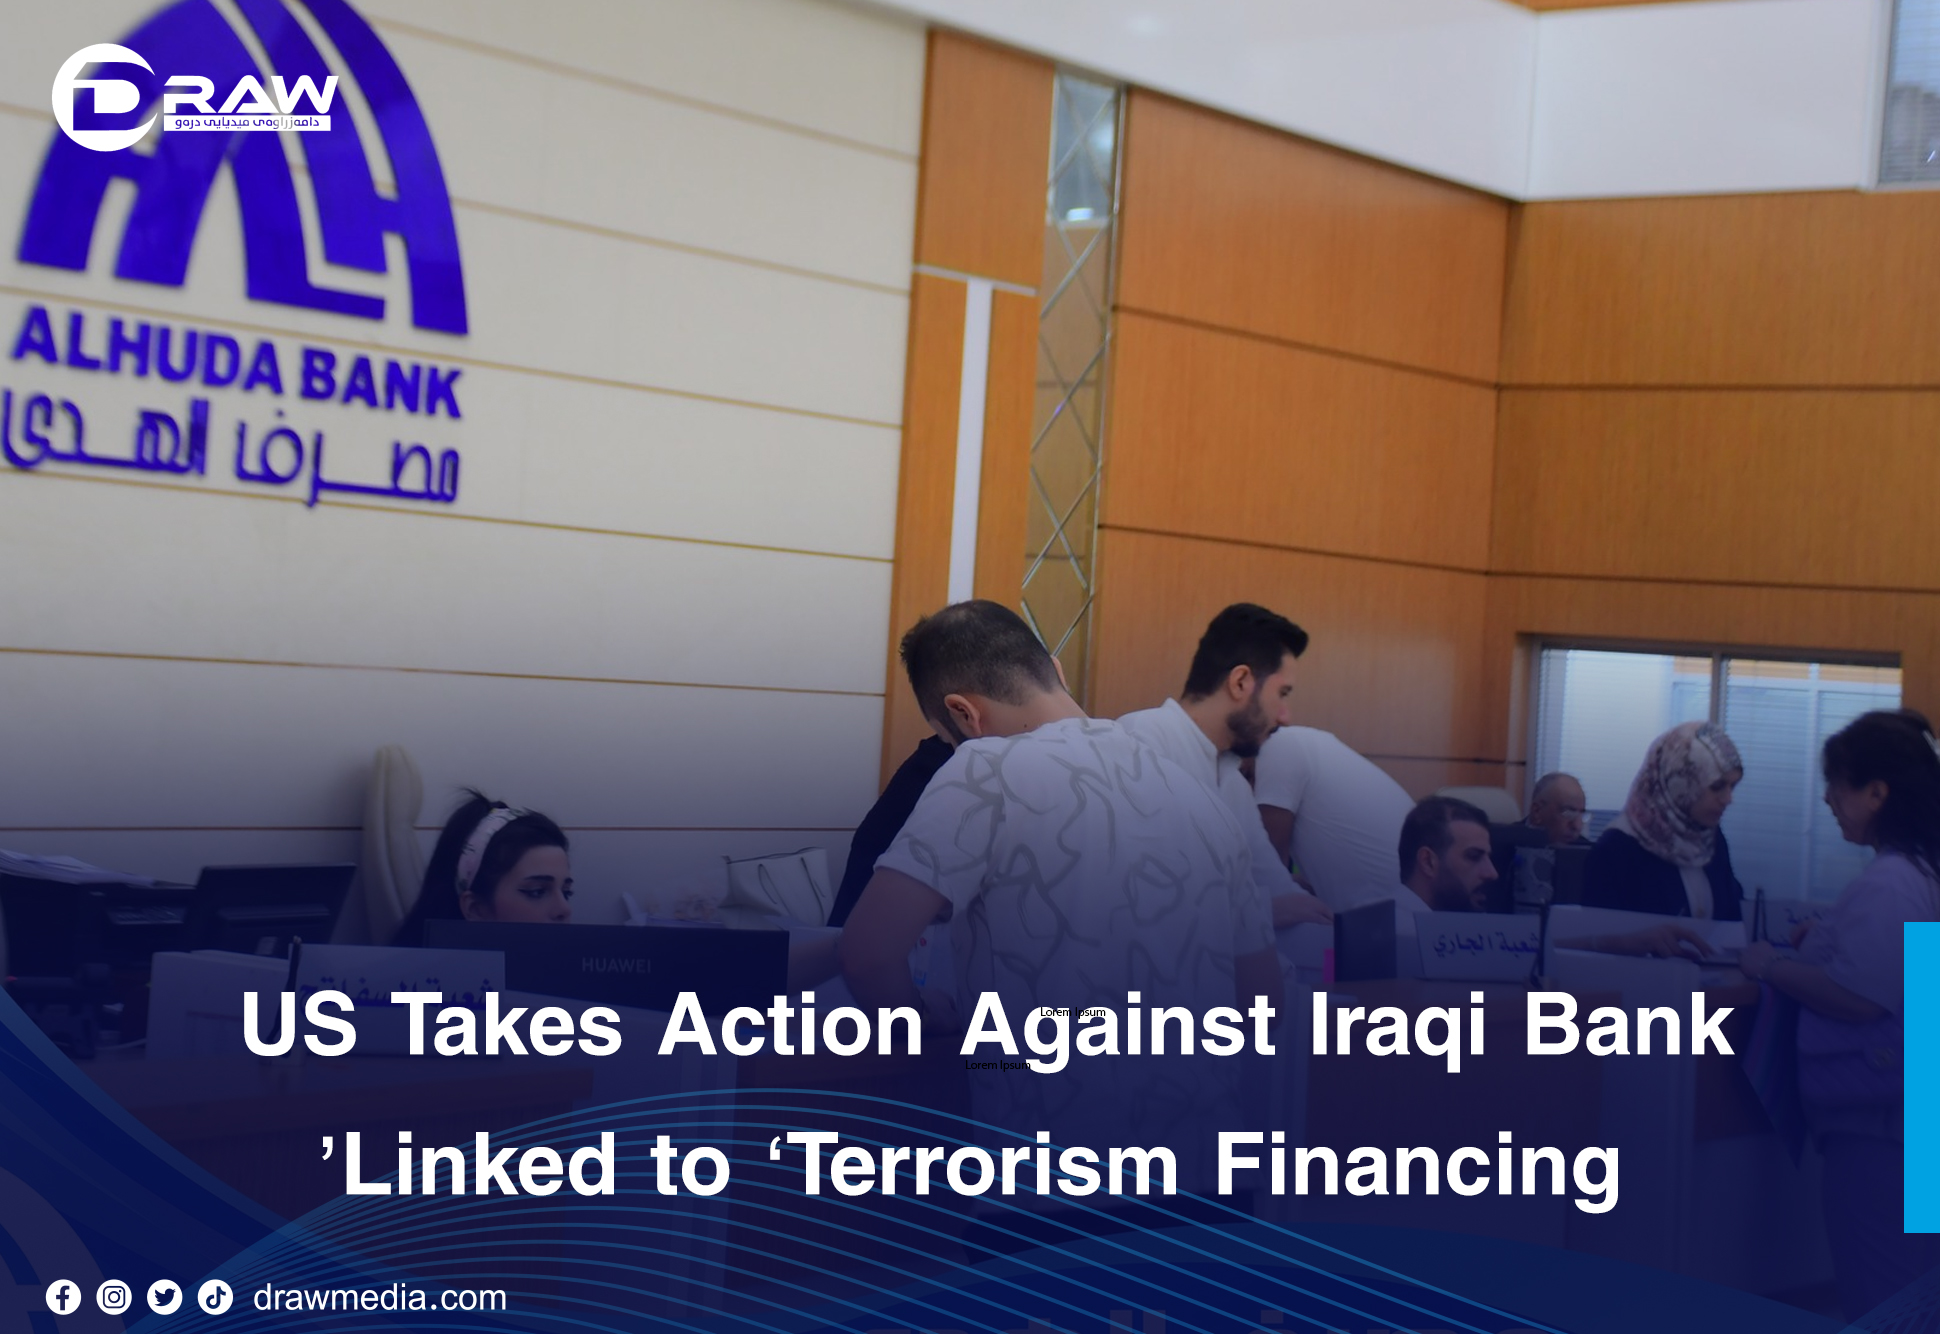 DrawMedia.net / US Takes Action Against Iraqi Bank Linked to ‘Terrorism Financing’